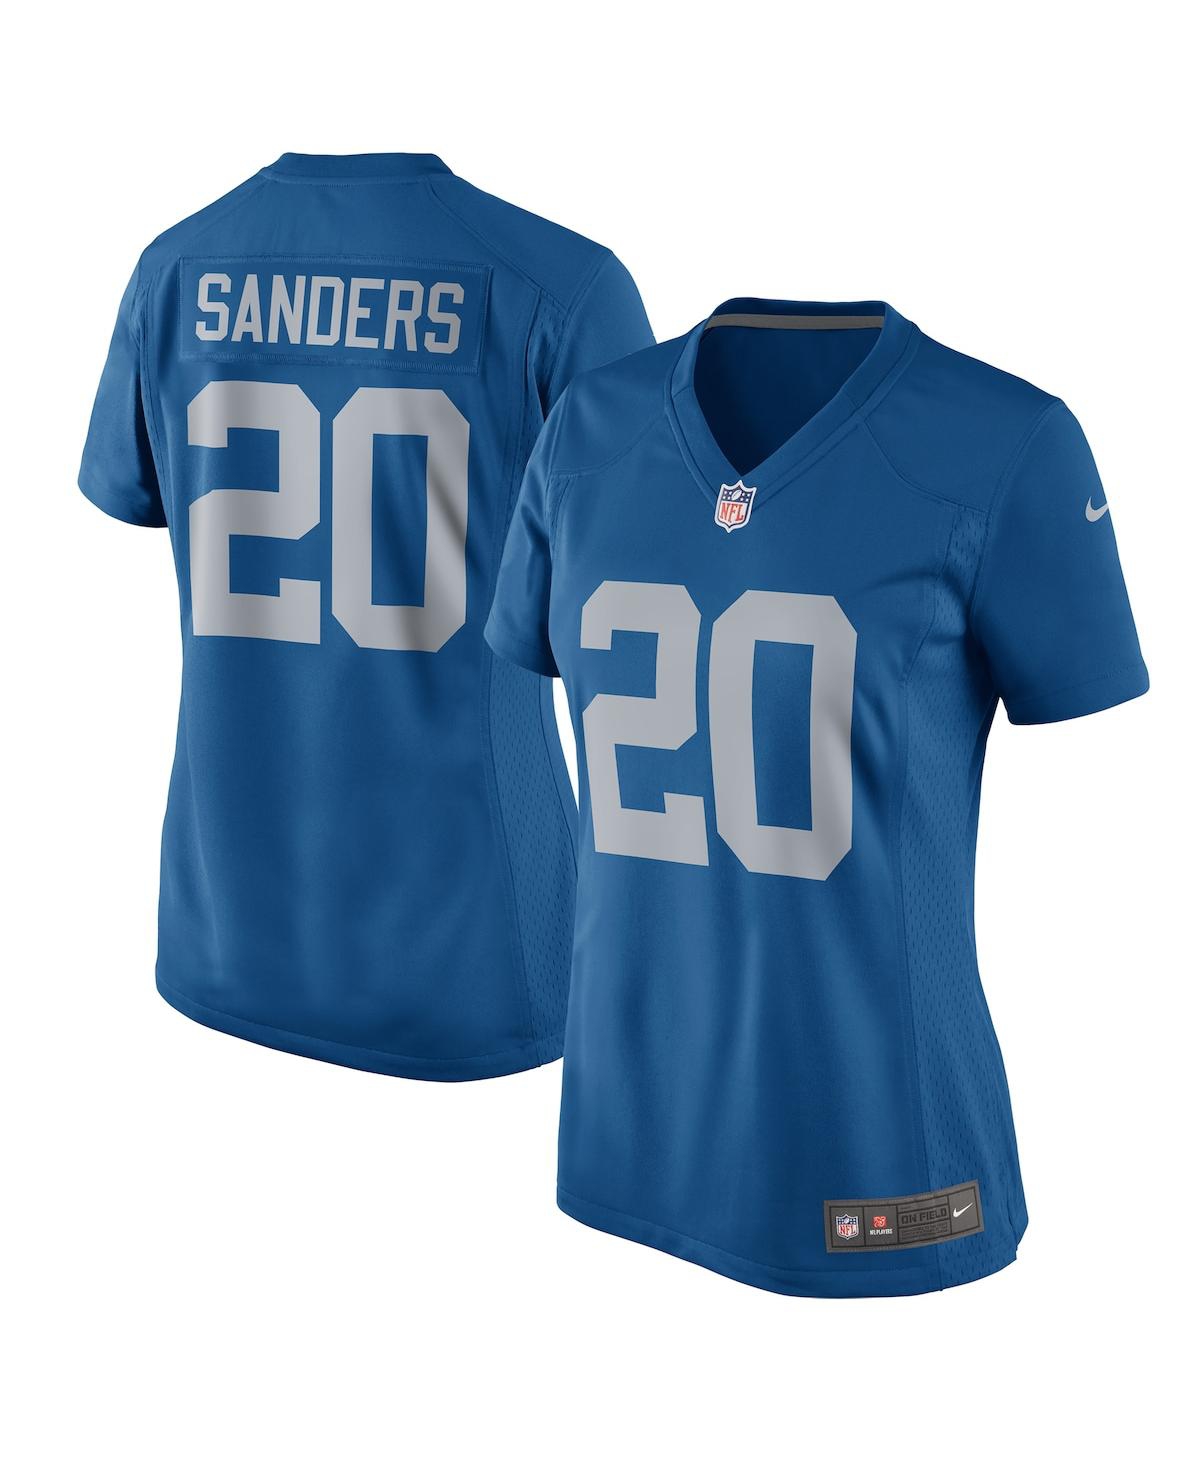 Women's Barry Sanders Blue Detroit Lions 2017 Throwback Retired Player Game Jersey